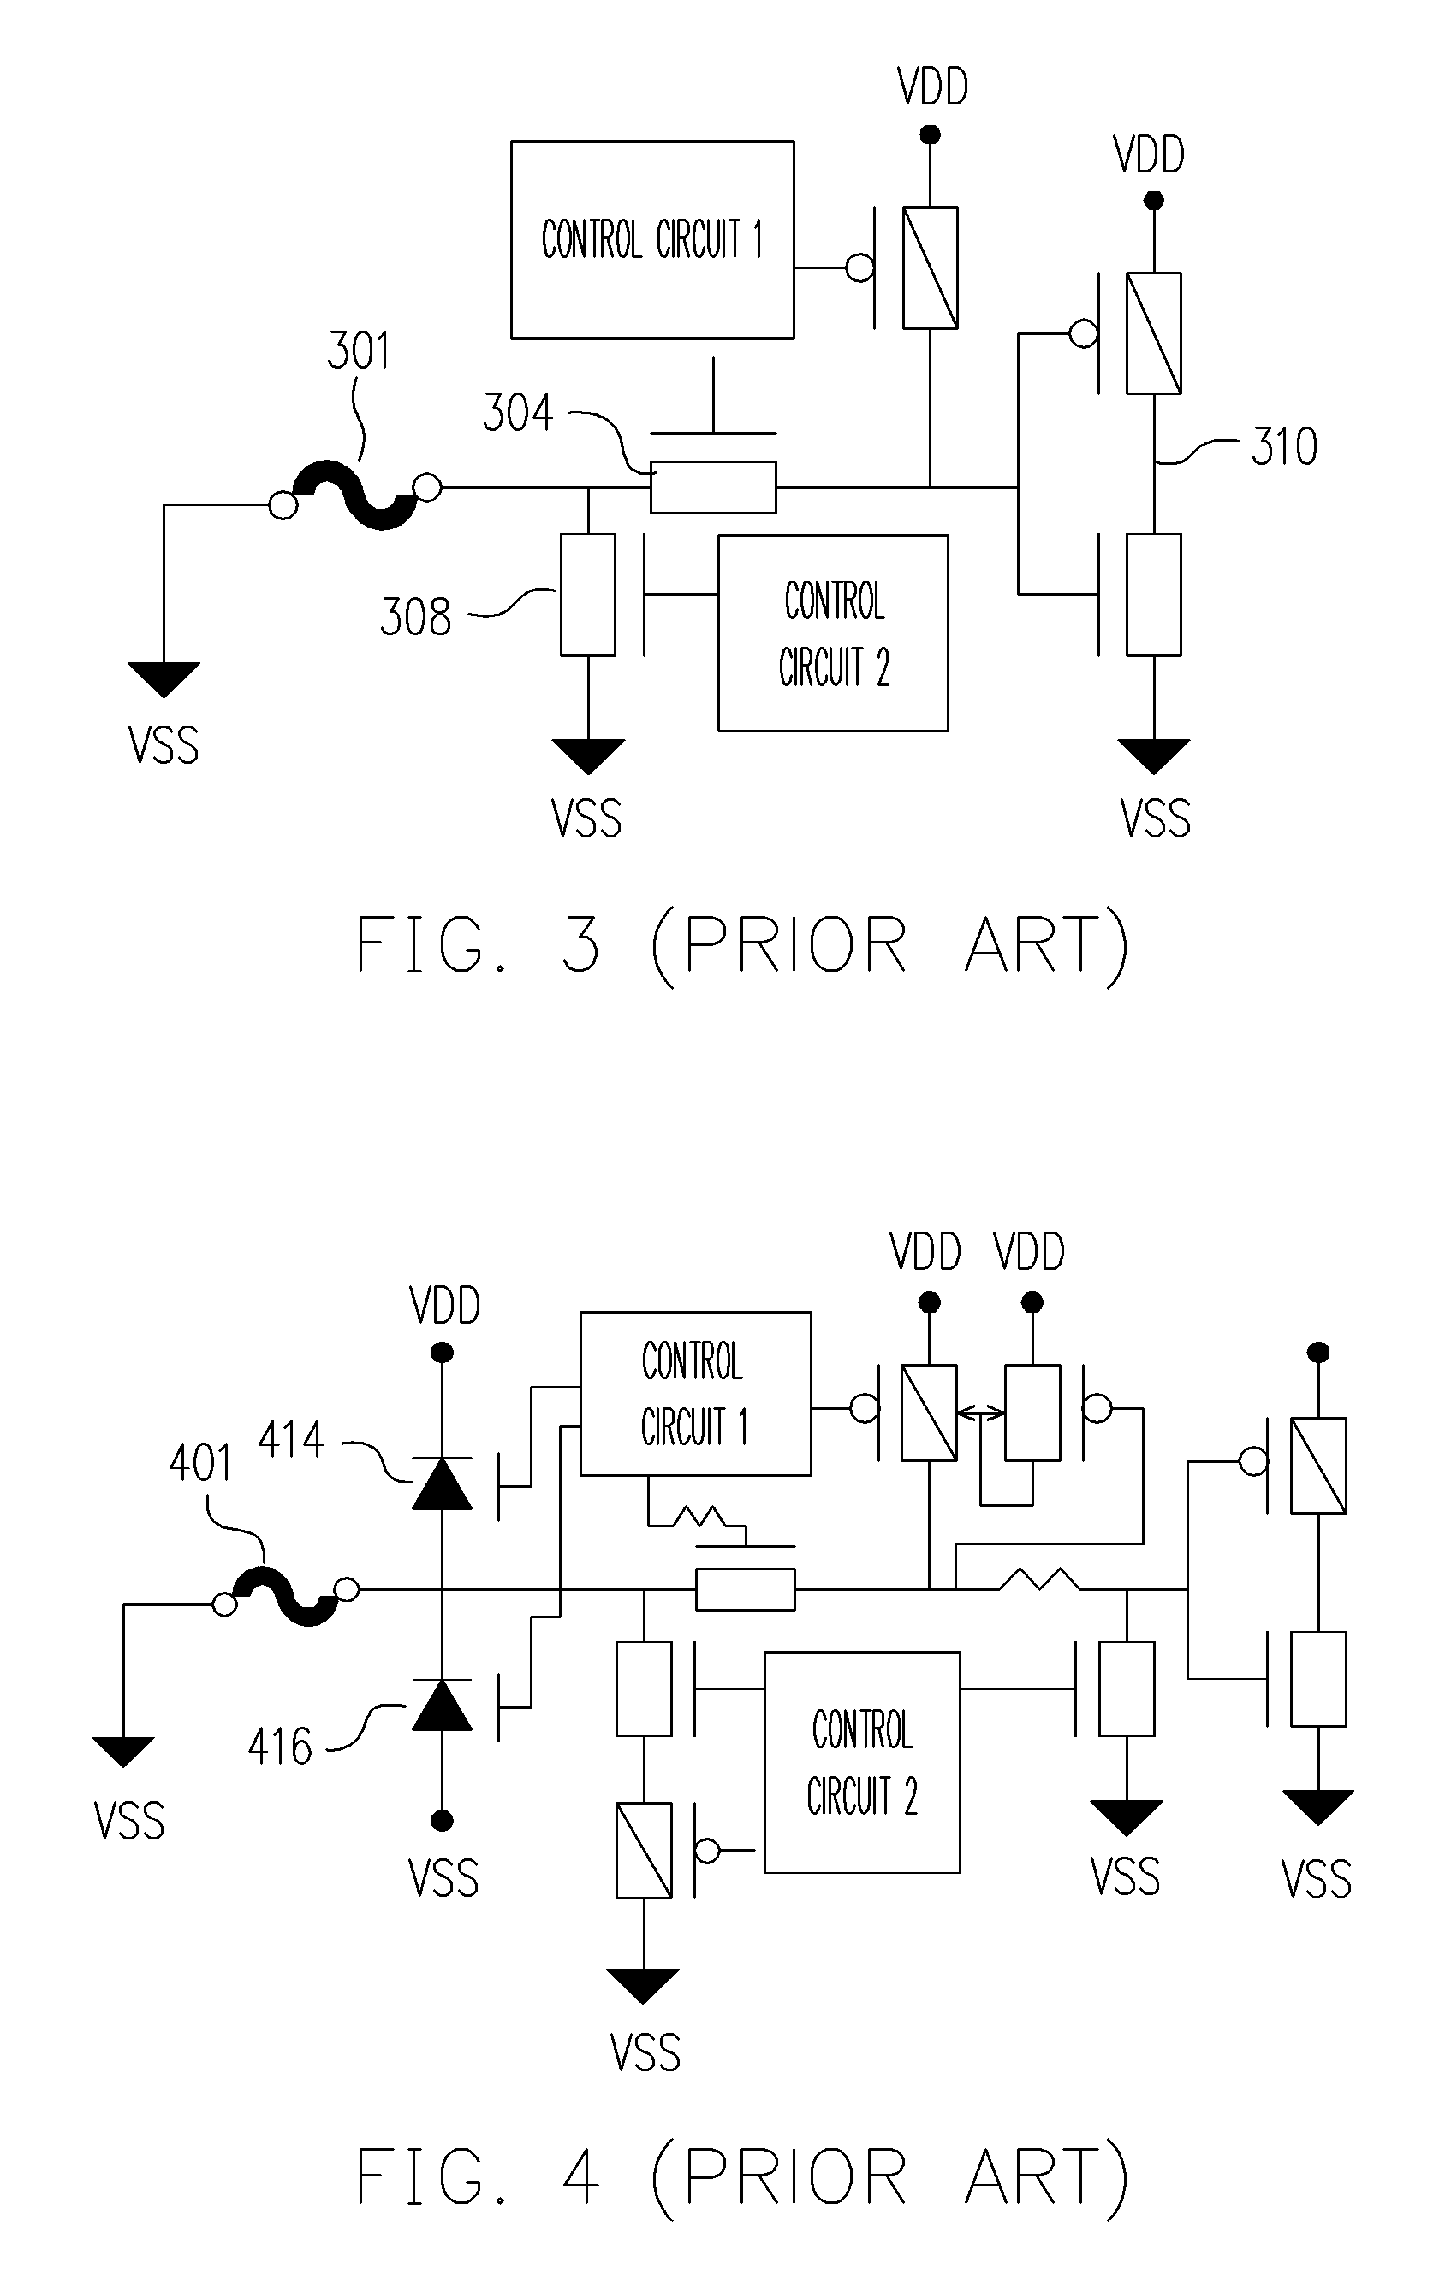 Electrostatic discharge (ESD) protection apparatus for programmable device